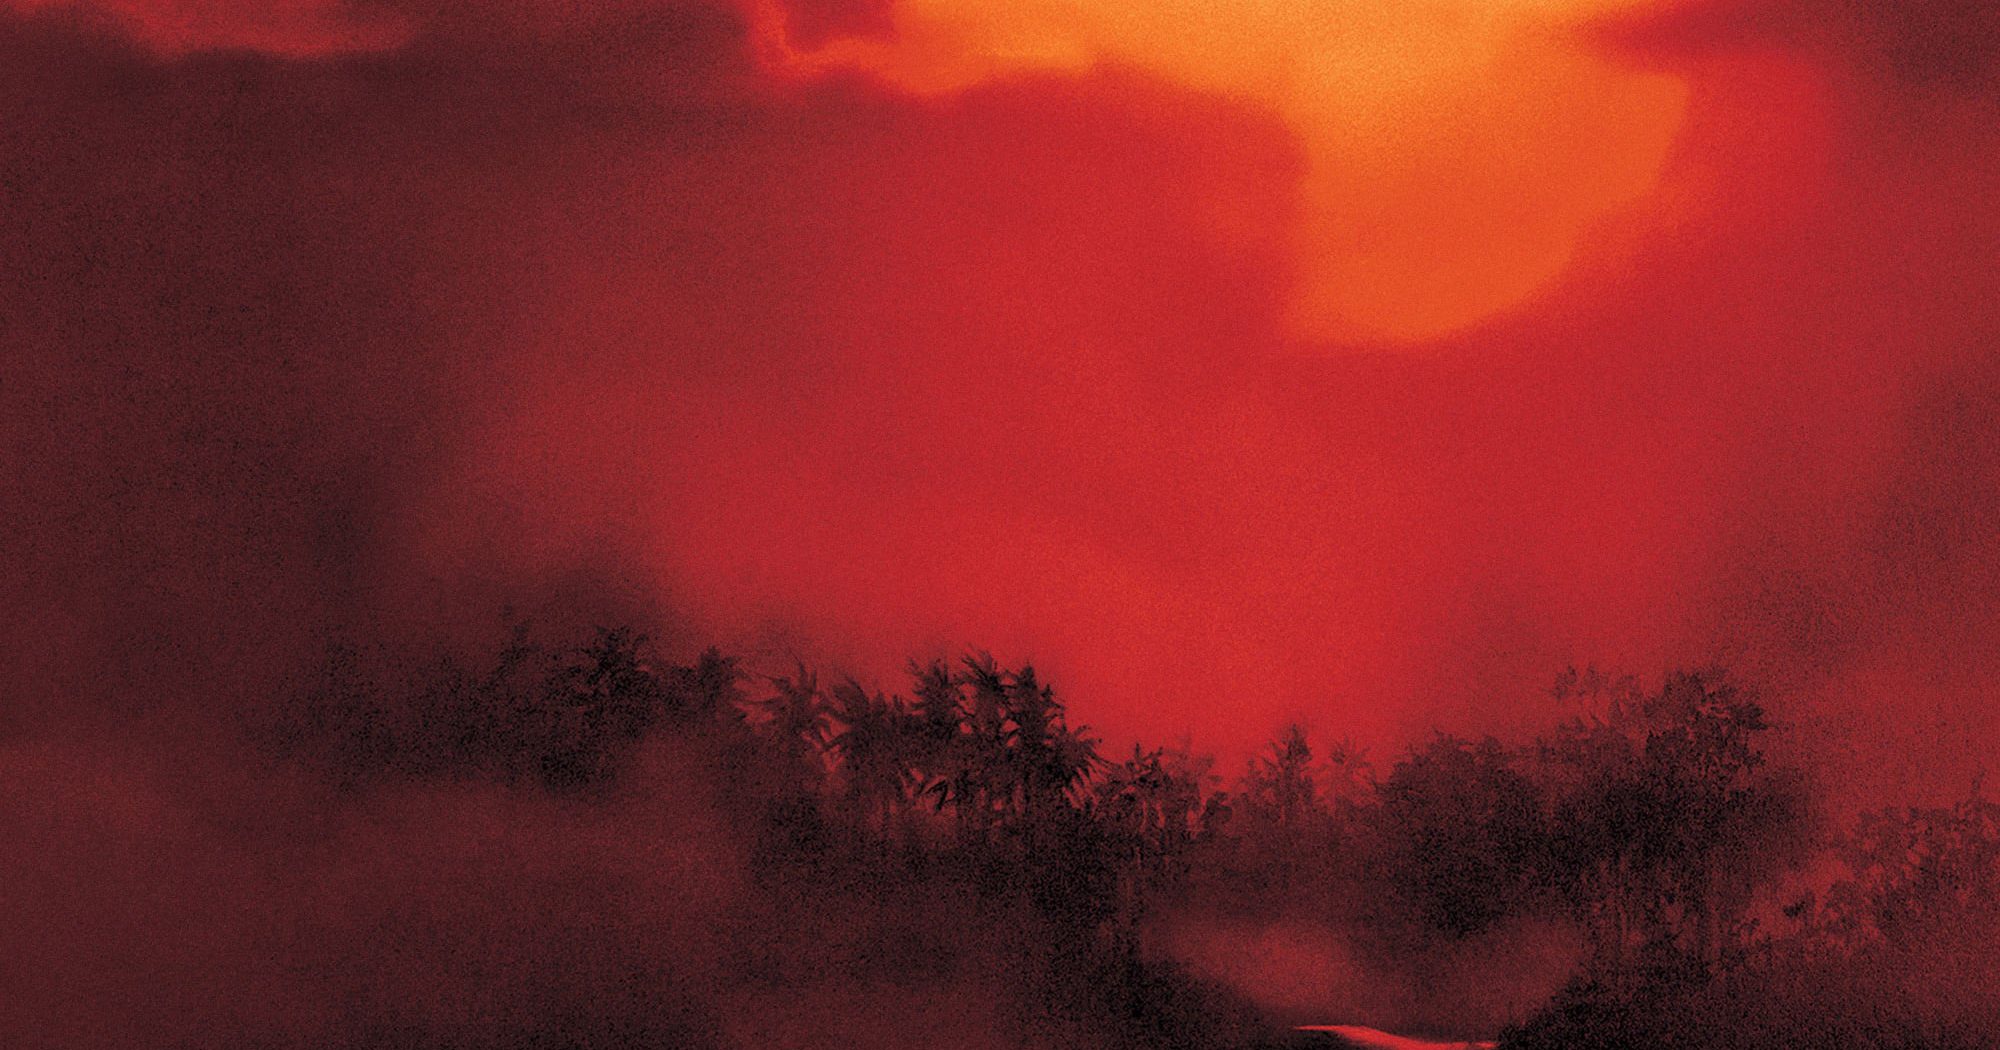 Poster for the movie "Apocalypse Now"